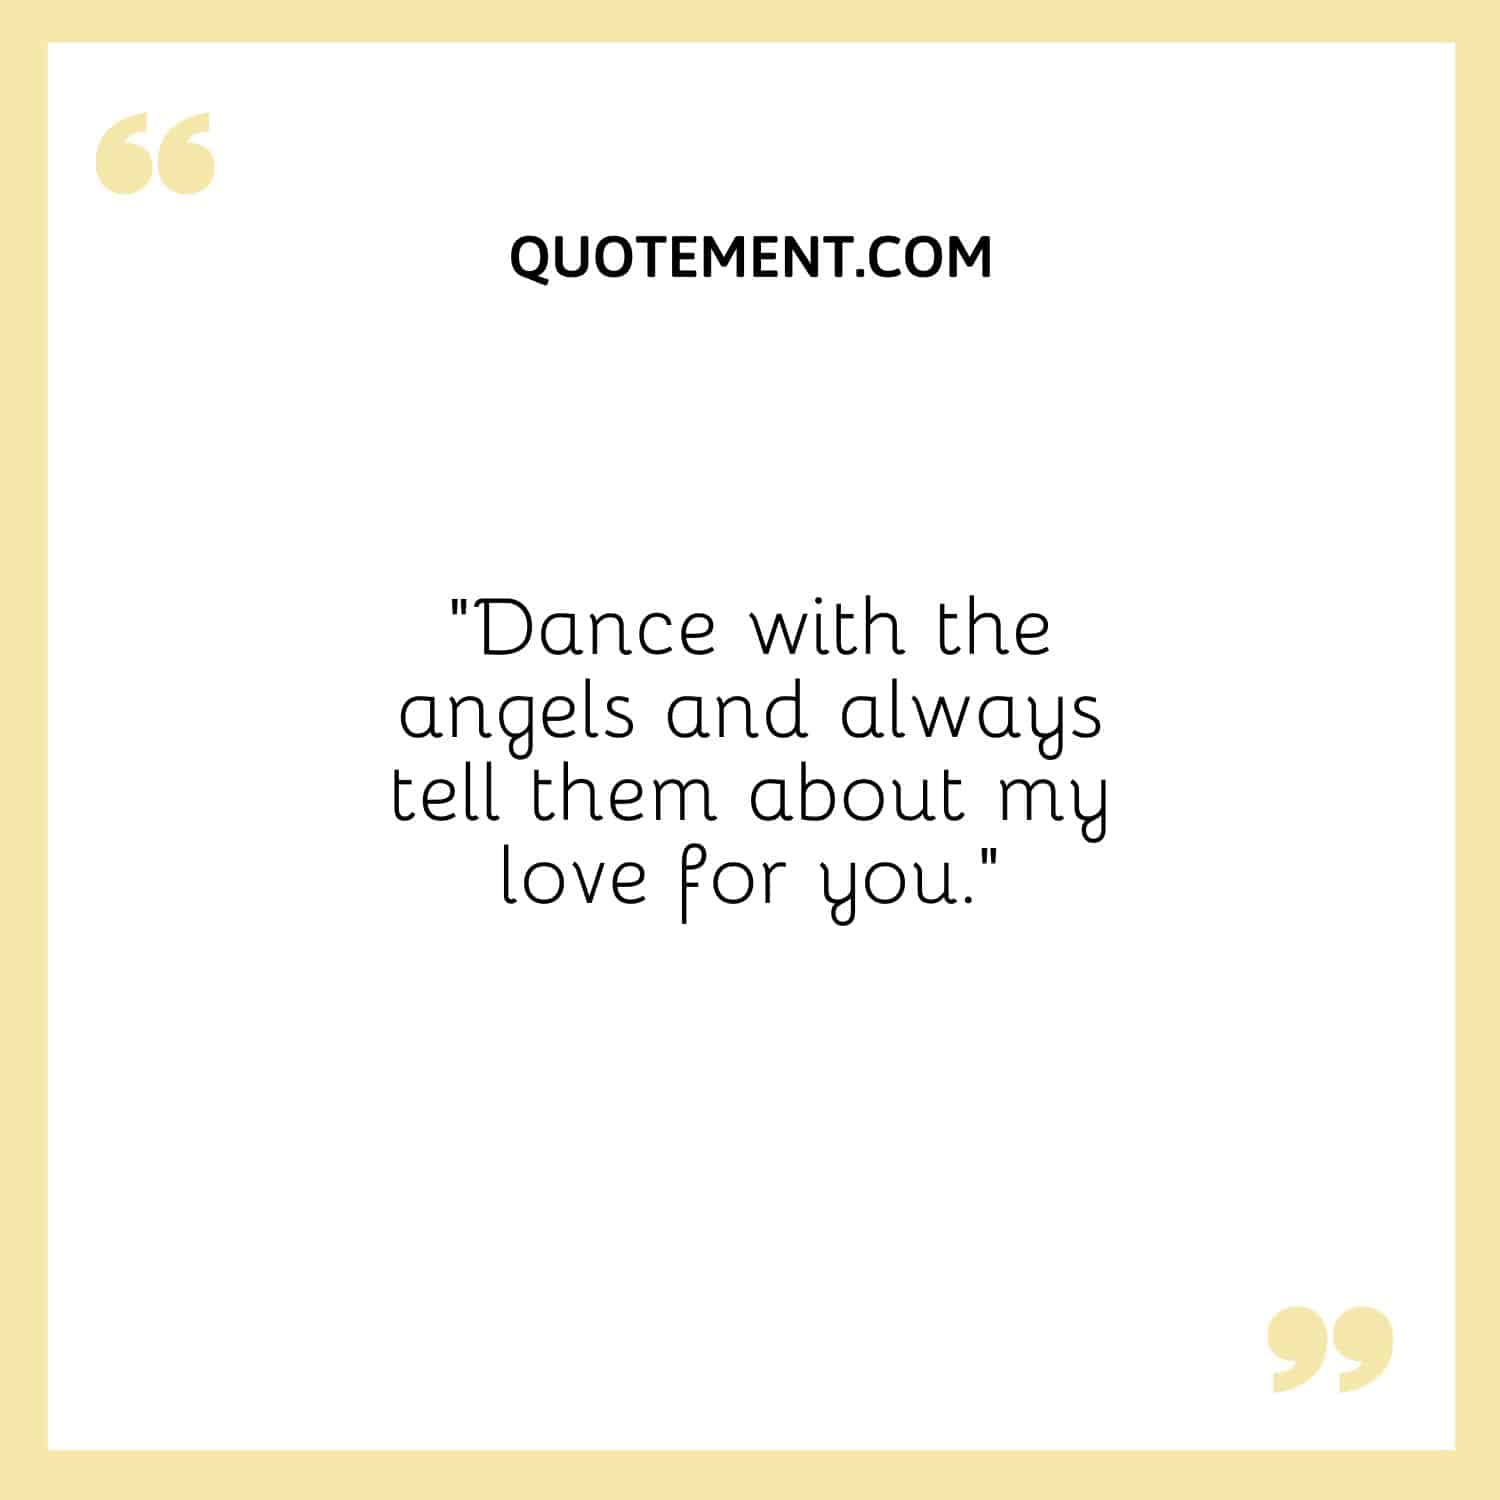 Dance with the angels and always tell them about my love for you